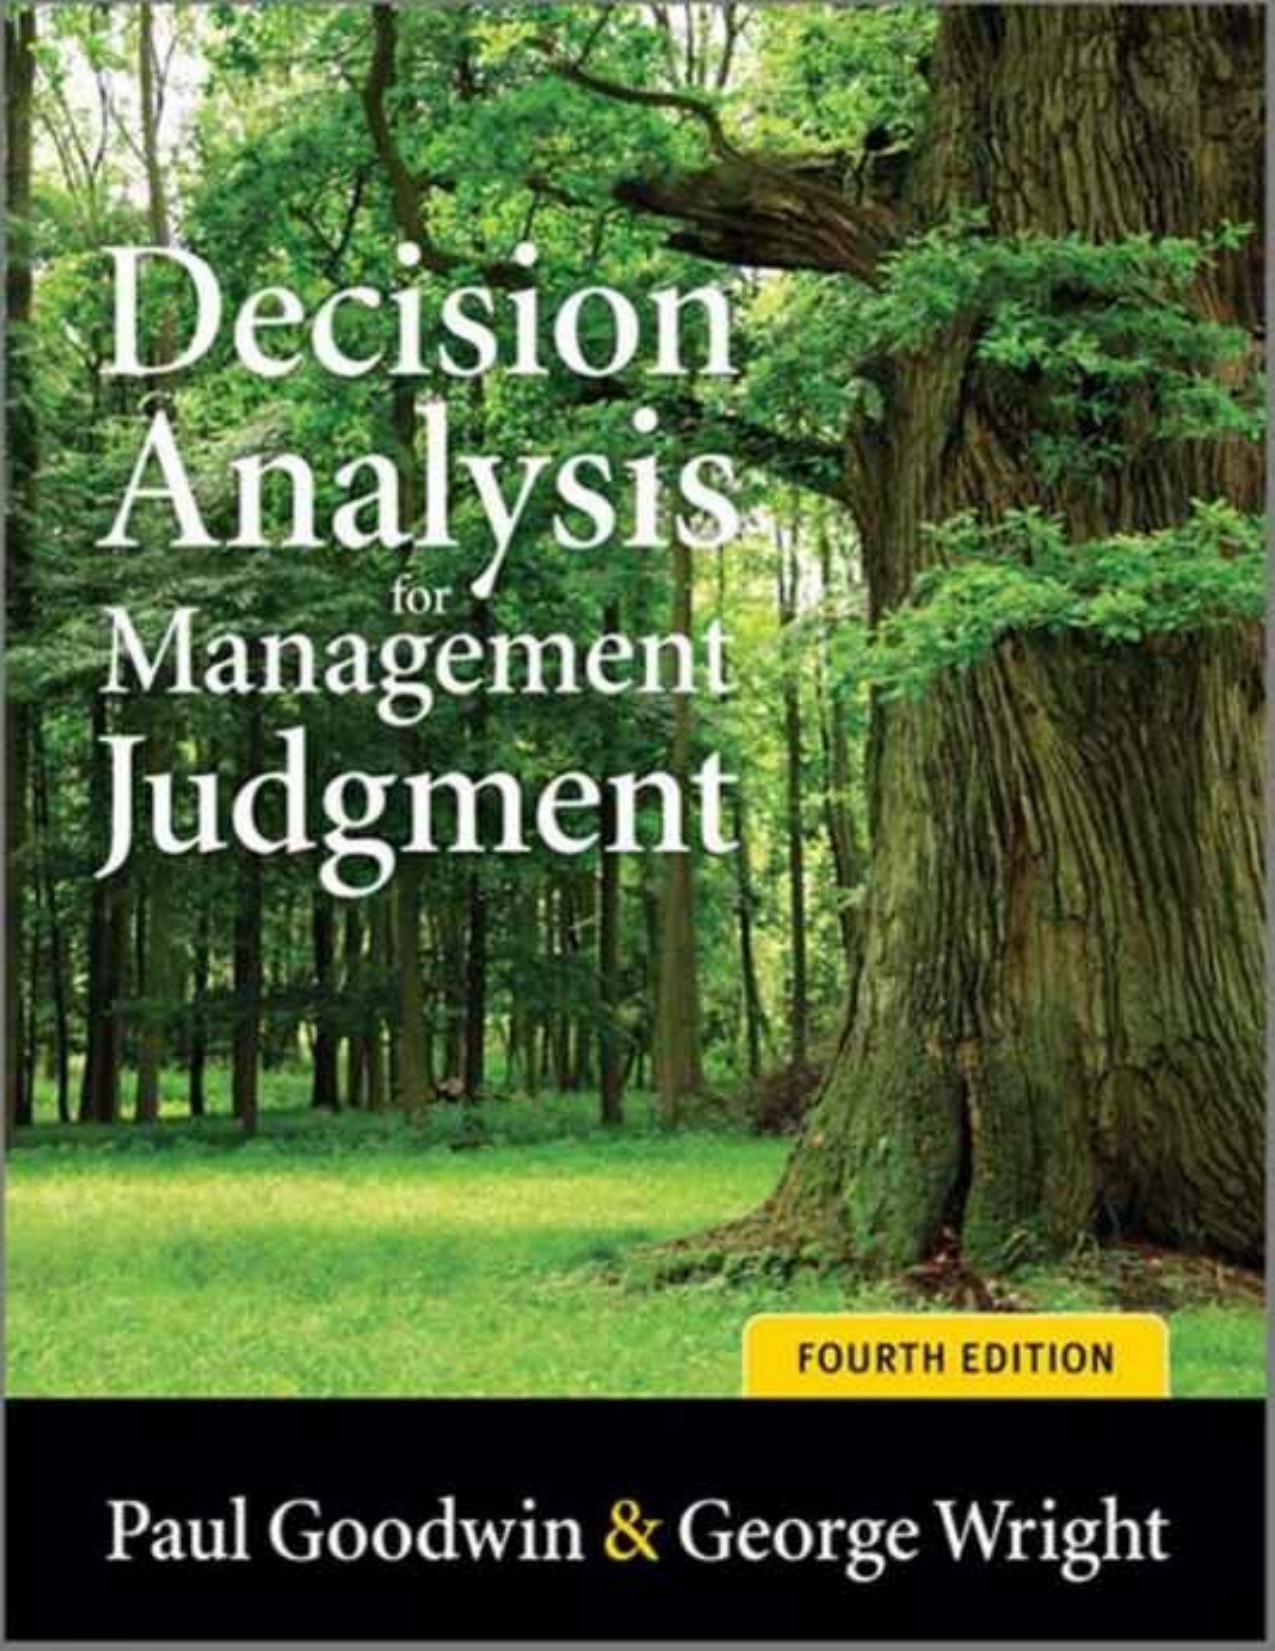 Decision Analysis for Management Judgment by Goodwin Paul.jpg